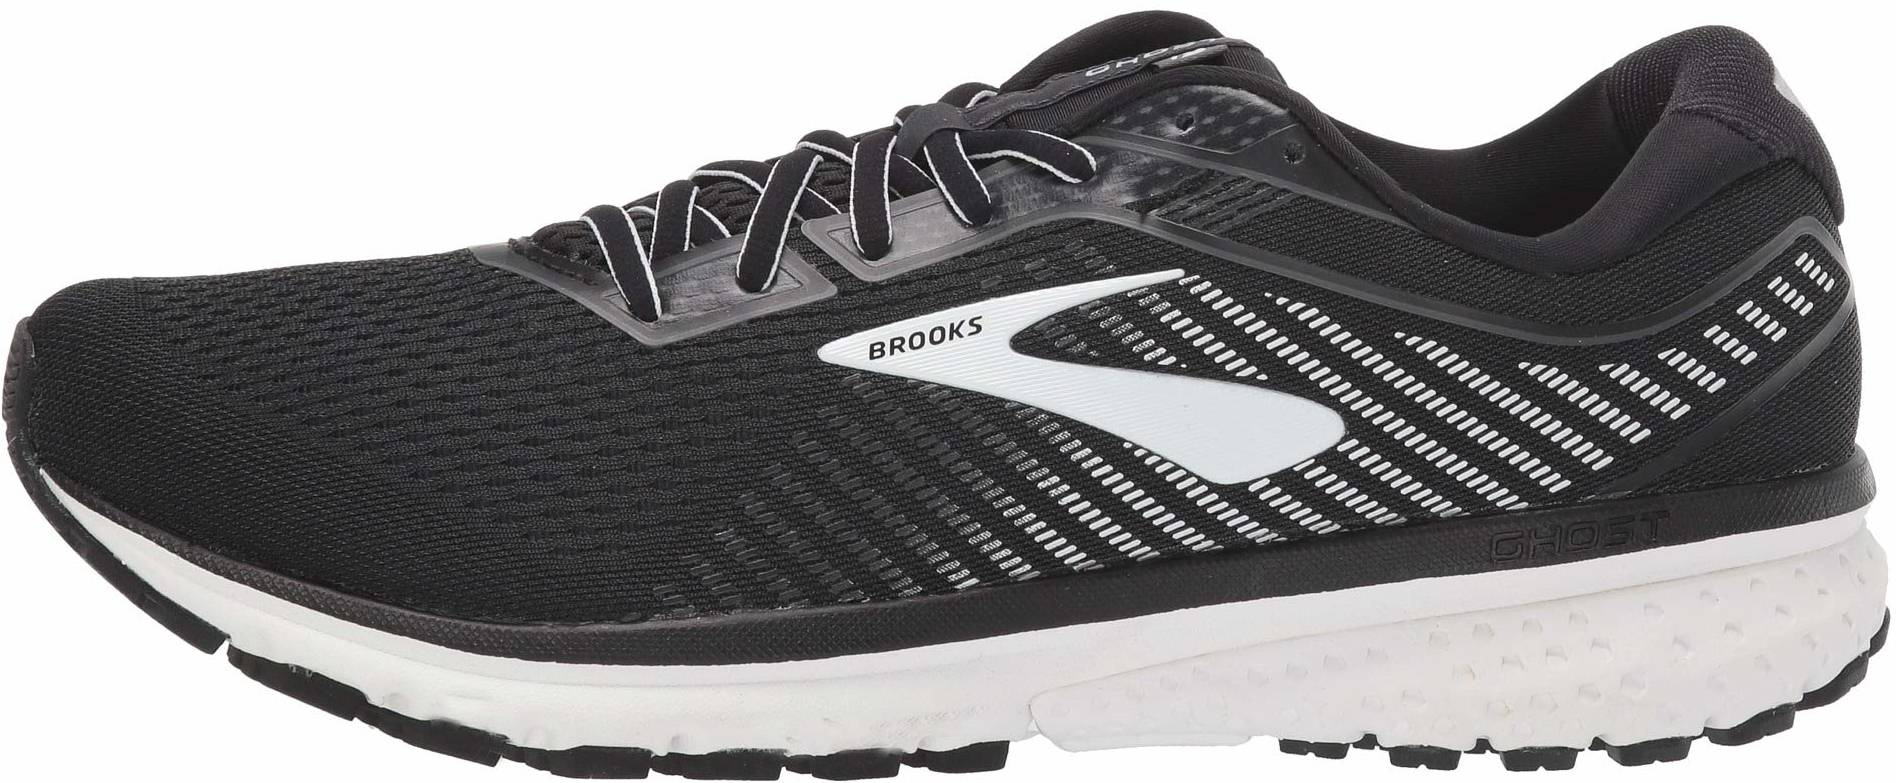 men's neutral cushioned running shoes